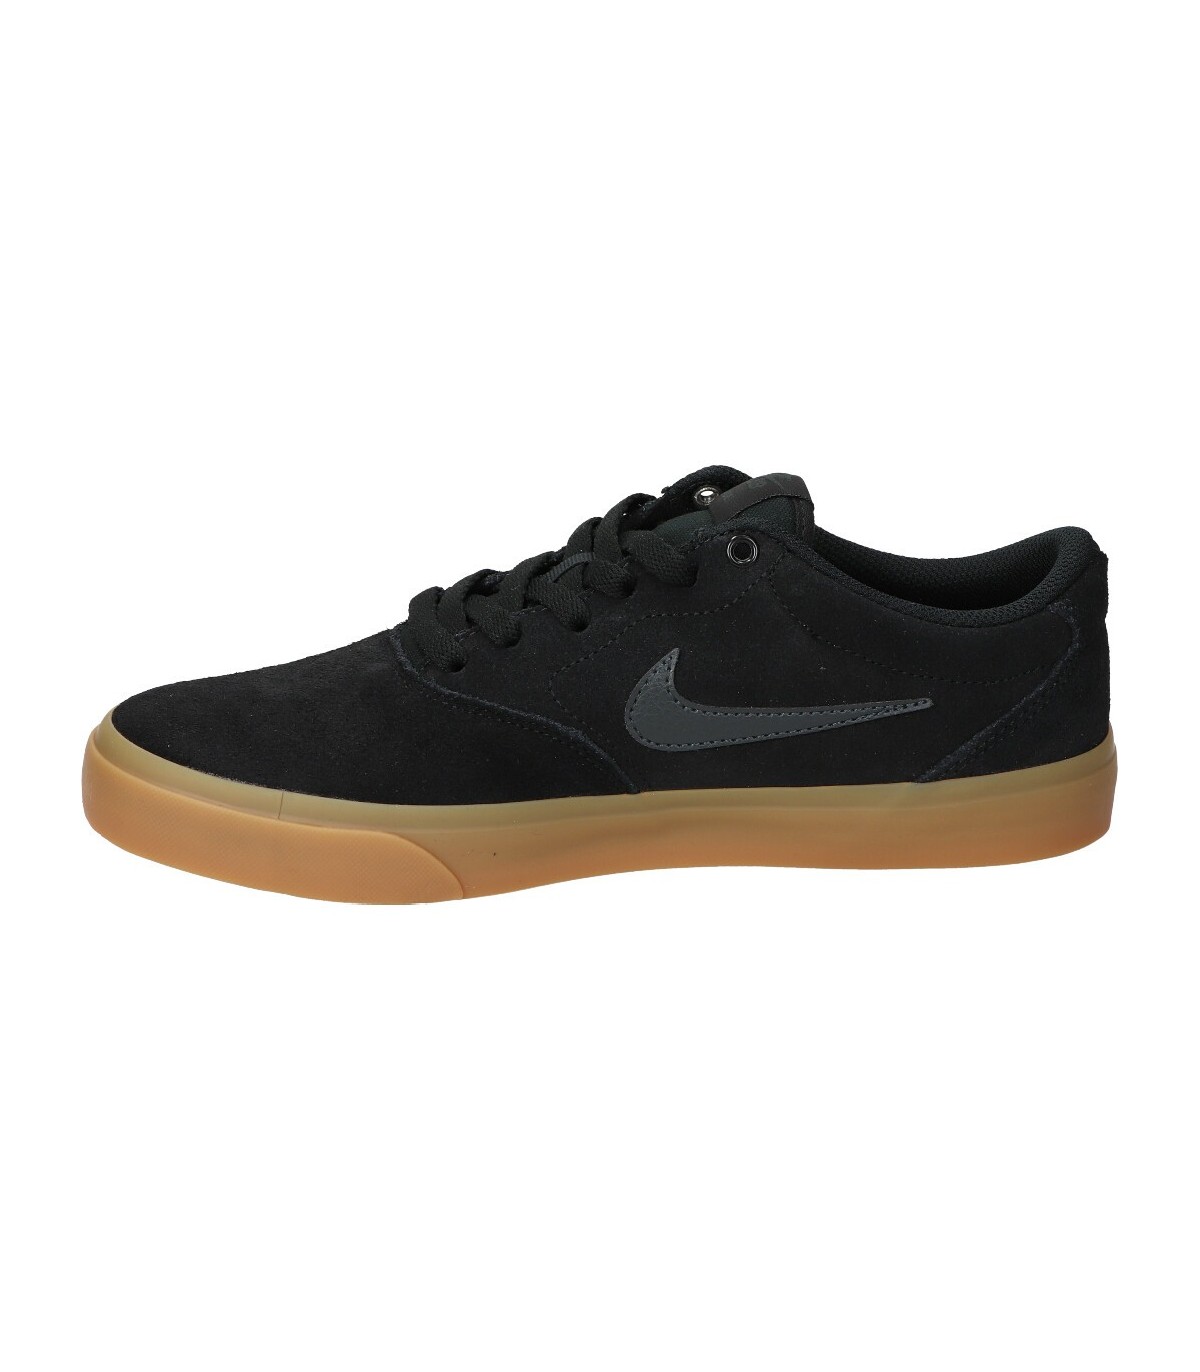 Deportivas nike Charge Suede ct3463-004 negro caramelo